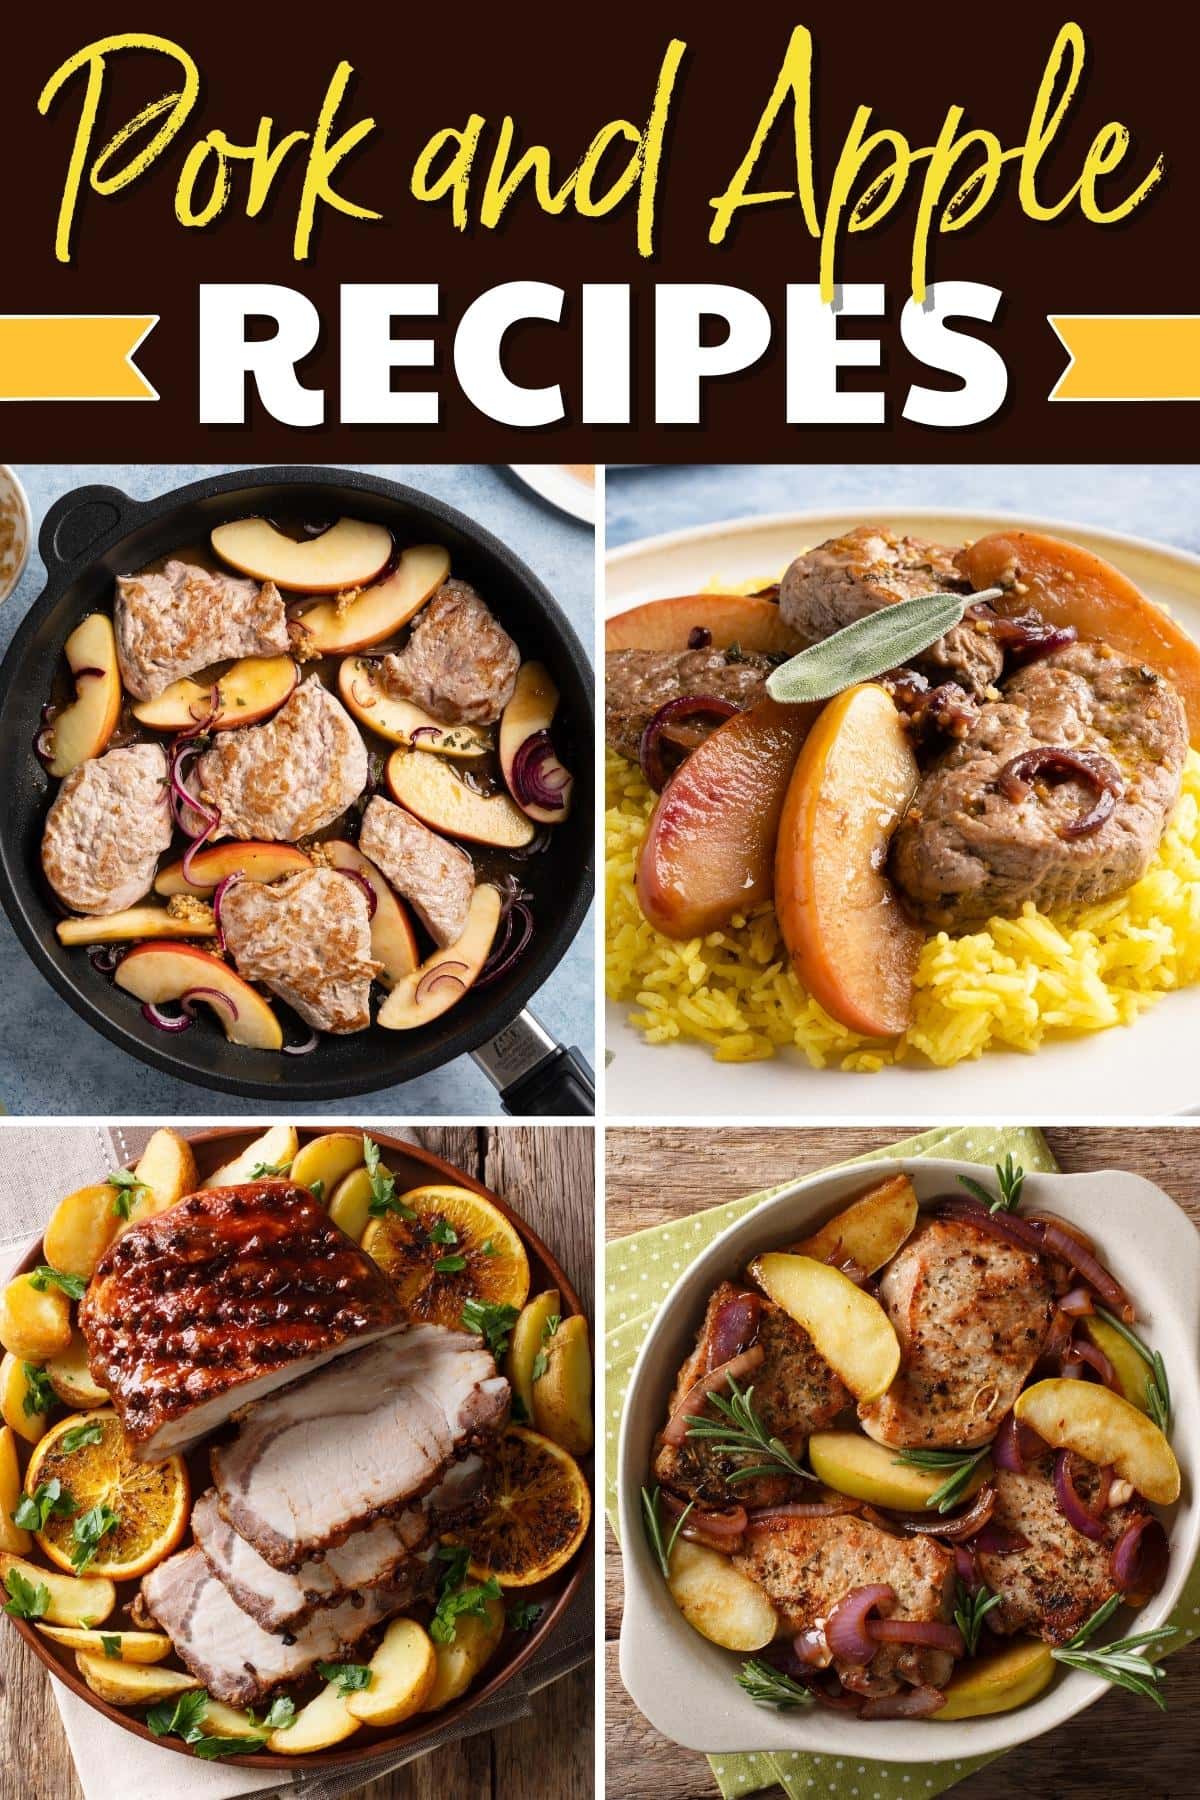 25 Easy Pork and Apple Recipes (Sweet & Savory Meals) - Insanely Good